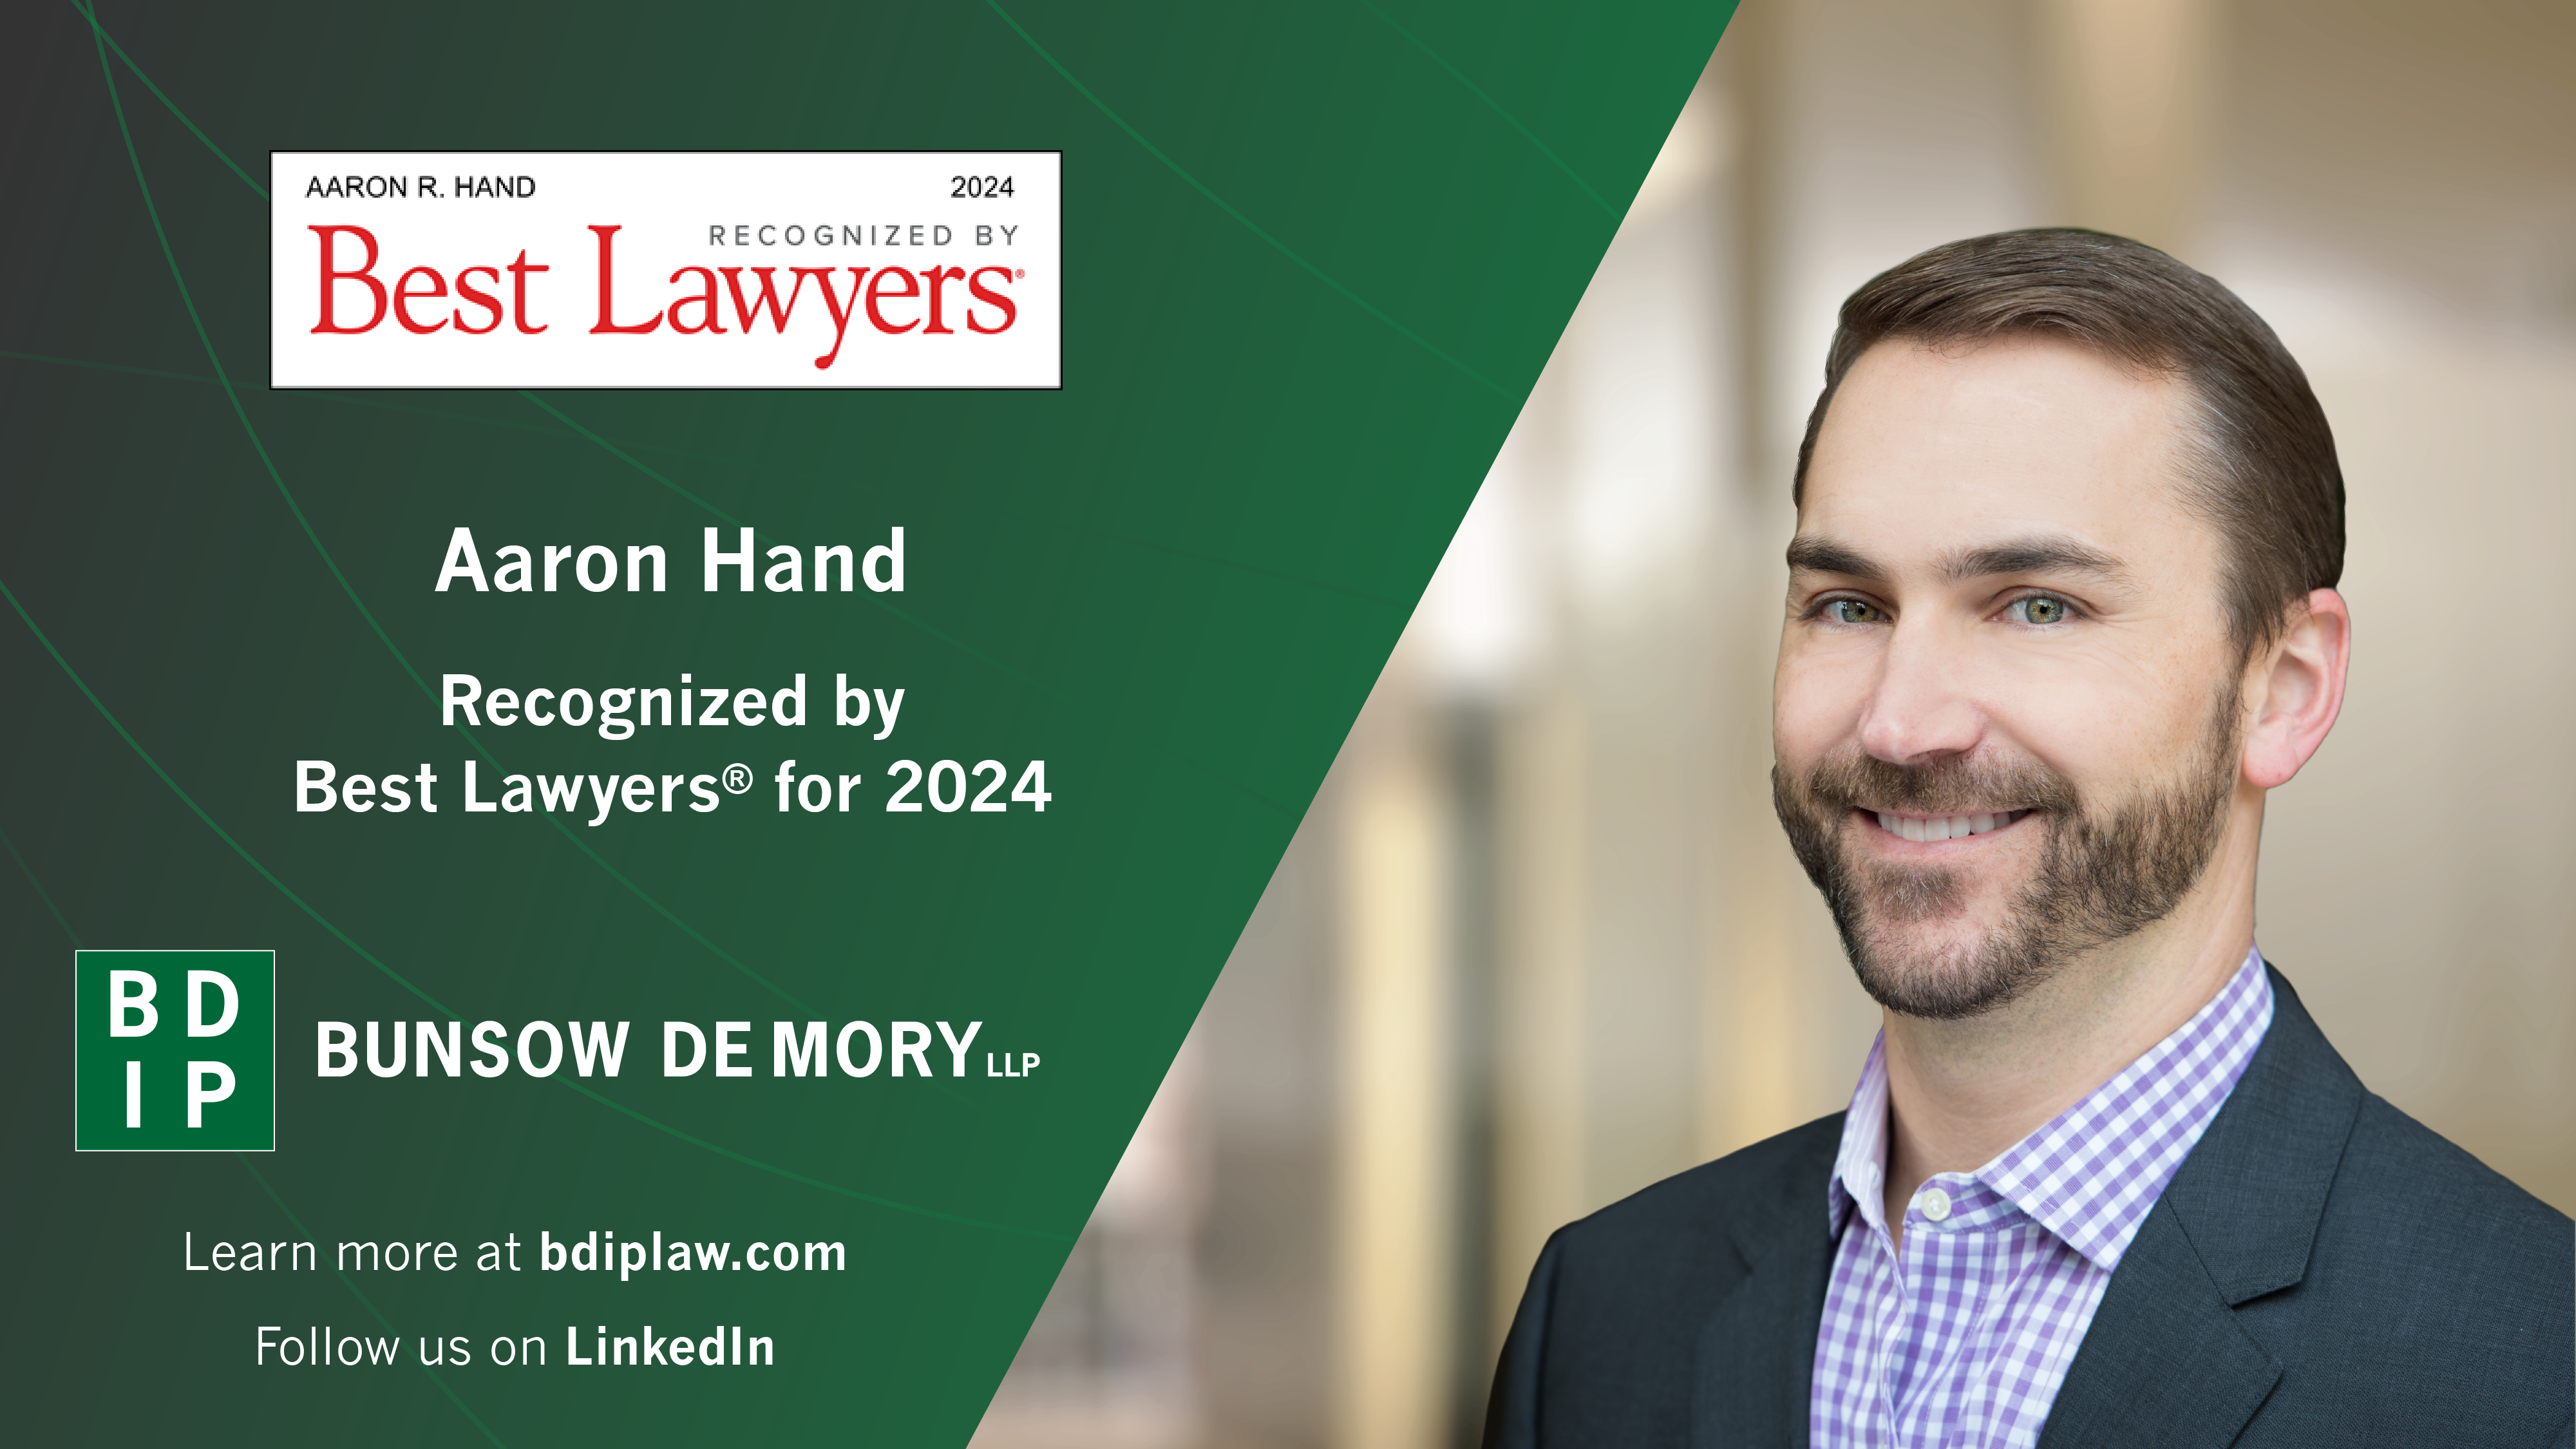 Aaron Hand Recognized by Best Lawyers for 2024